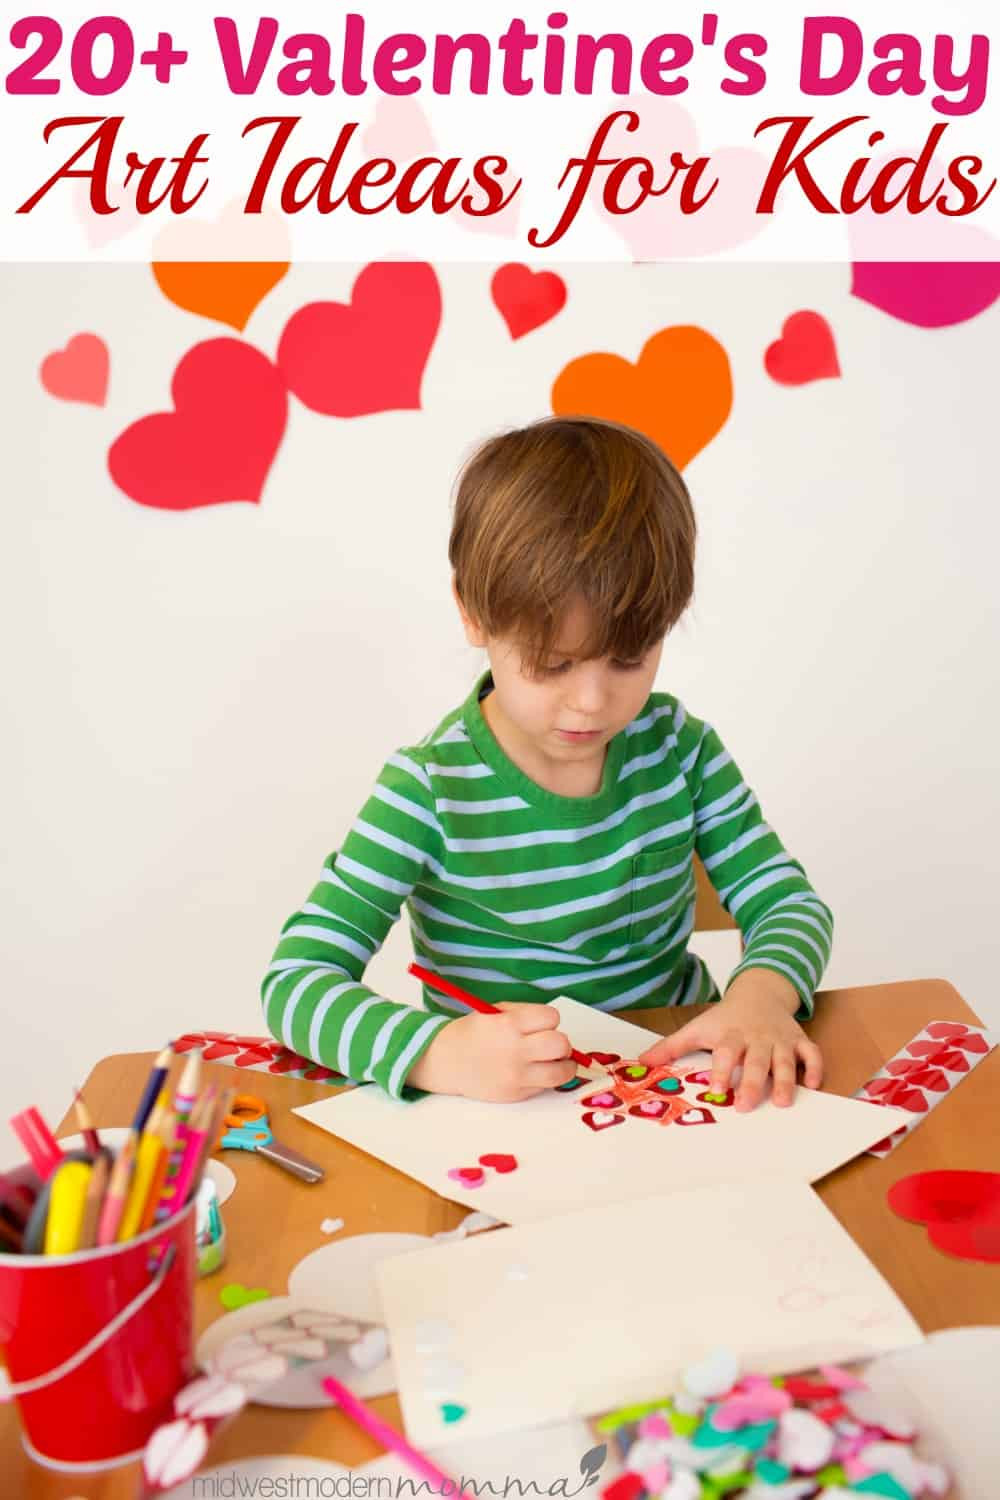 Valentines Day Ideas For Toddlers
 20 Fun Valentine s Day Art Ideas for Kids